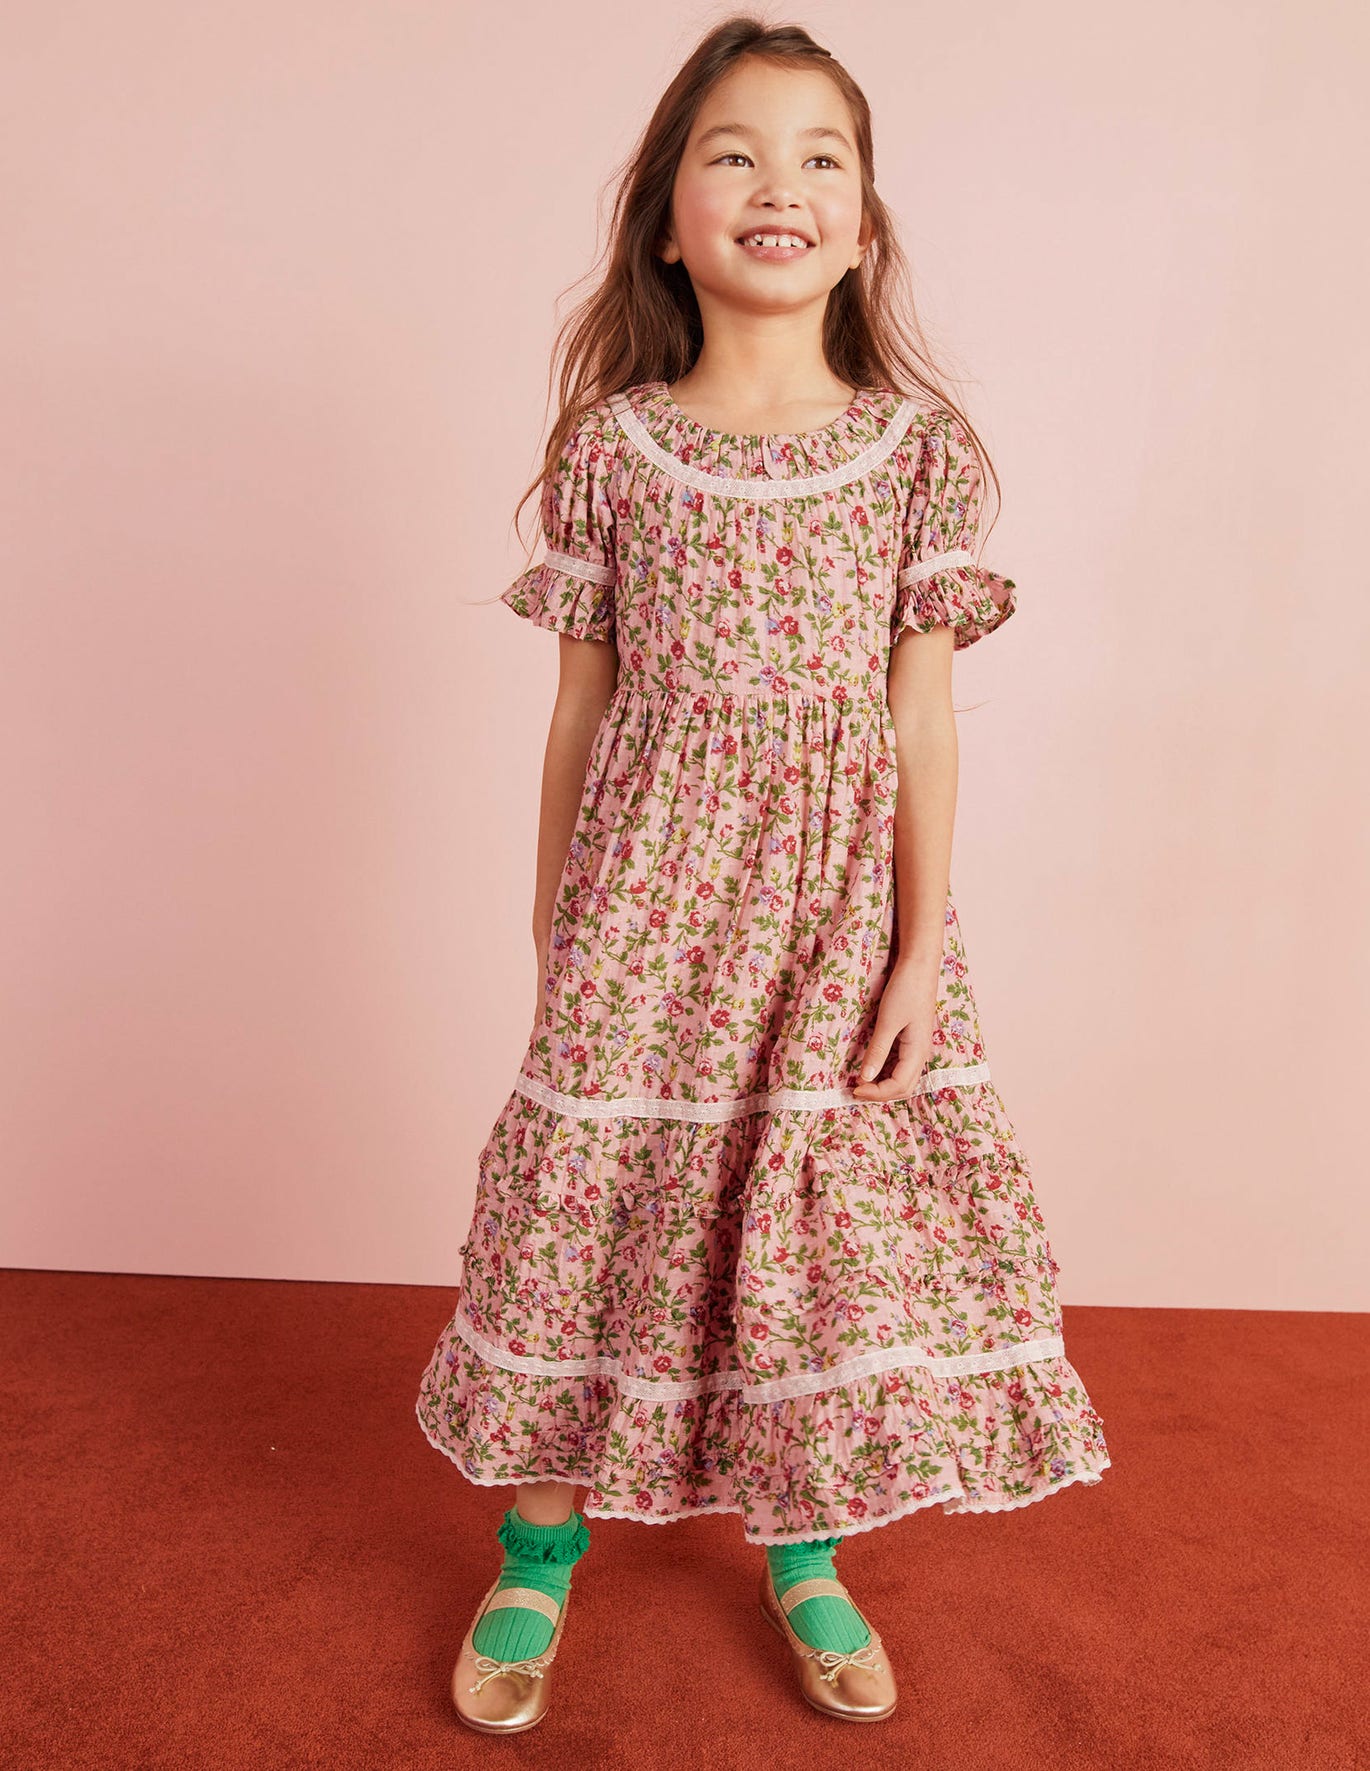 Boden Printed Lace Trim Party Dress - Rambling Rose Pink